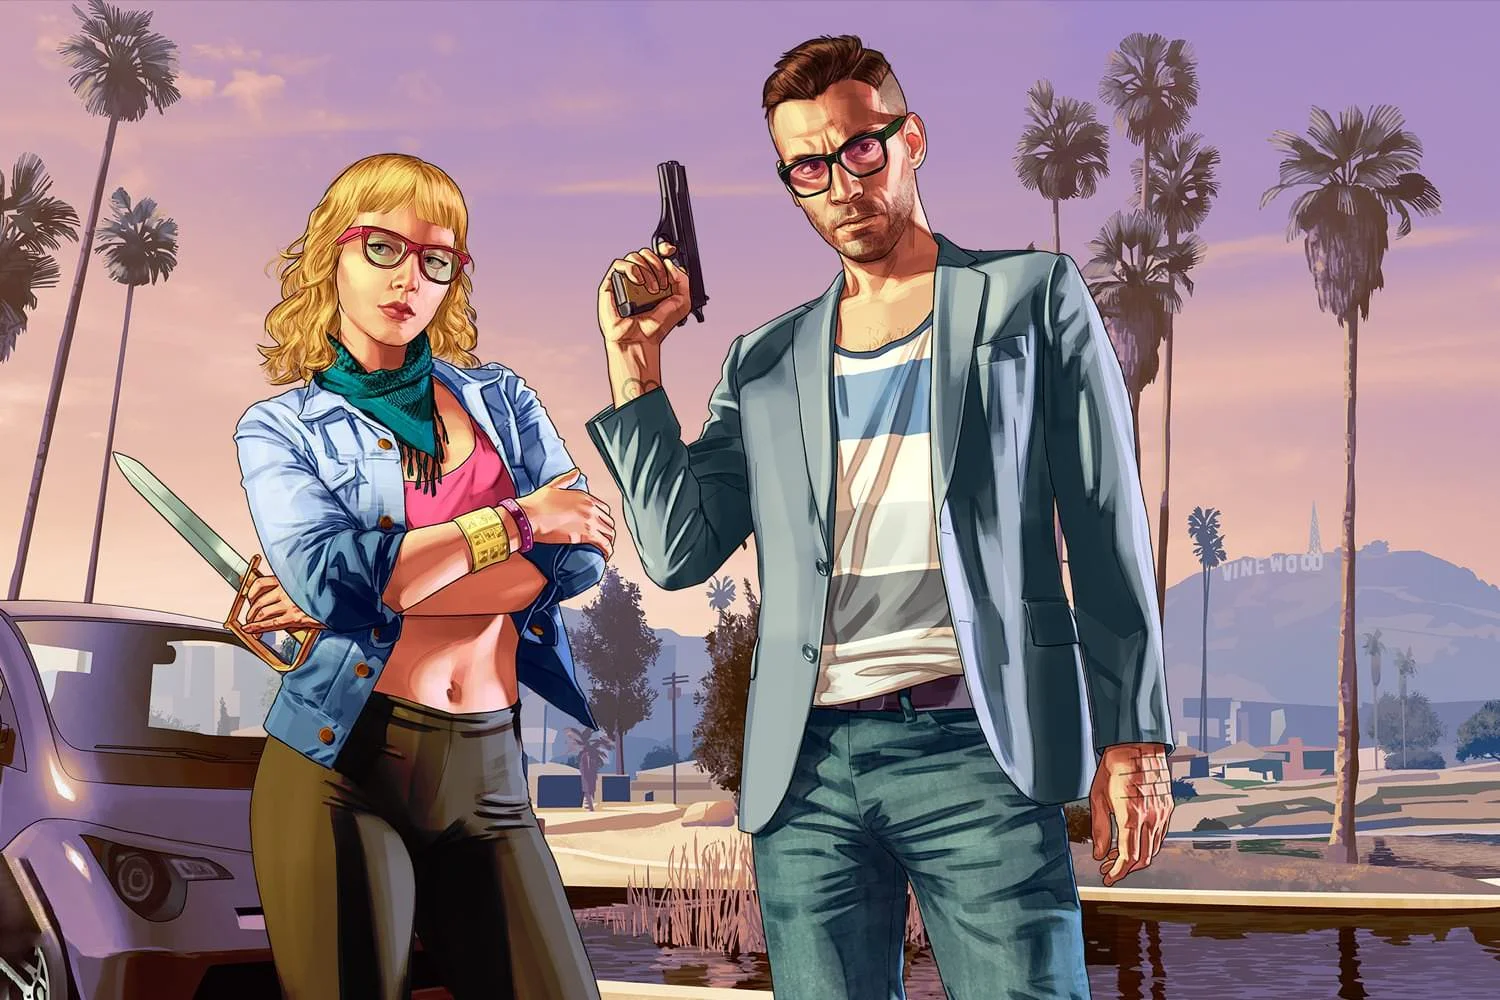 GTA 6 could cost $150. The head of Take-Two Interactive himself spoke about the reasons for the high price tag